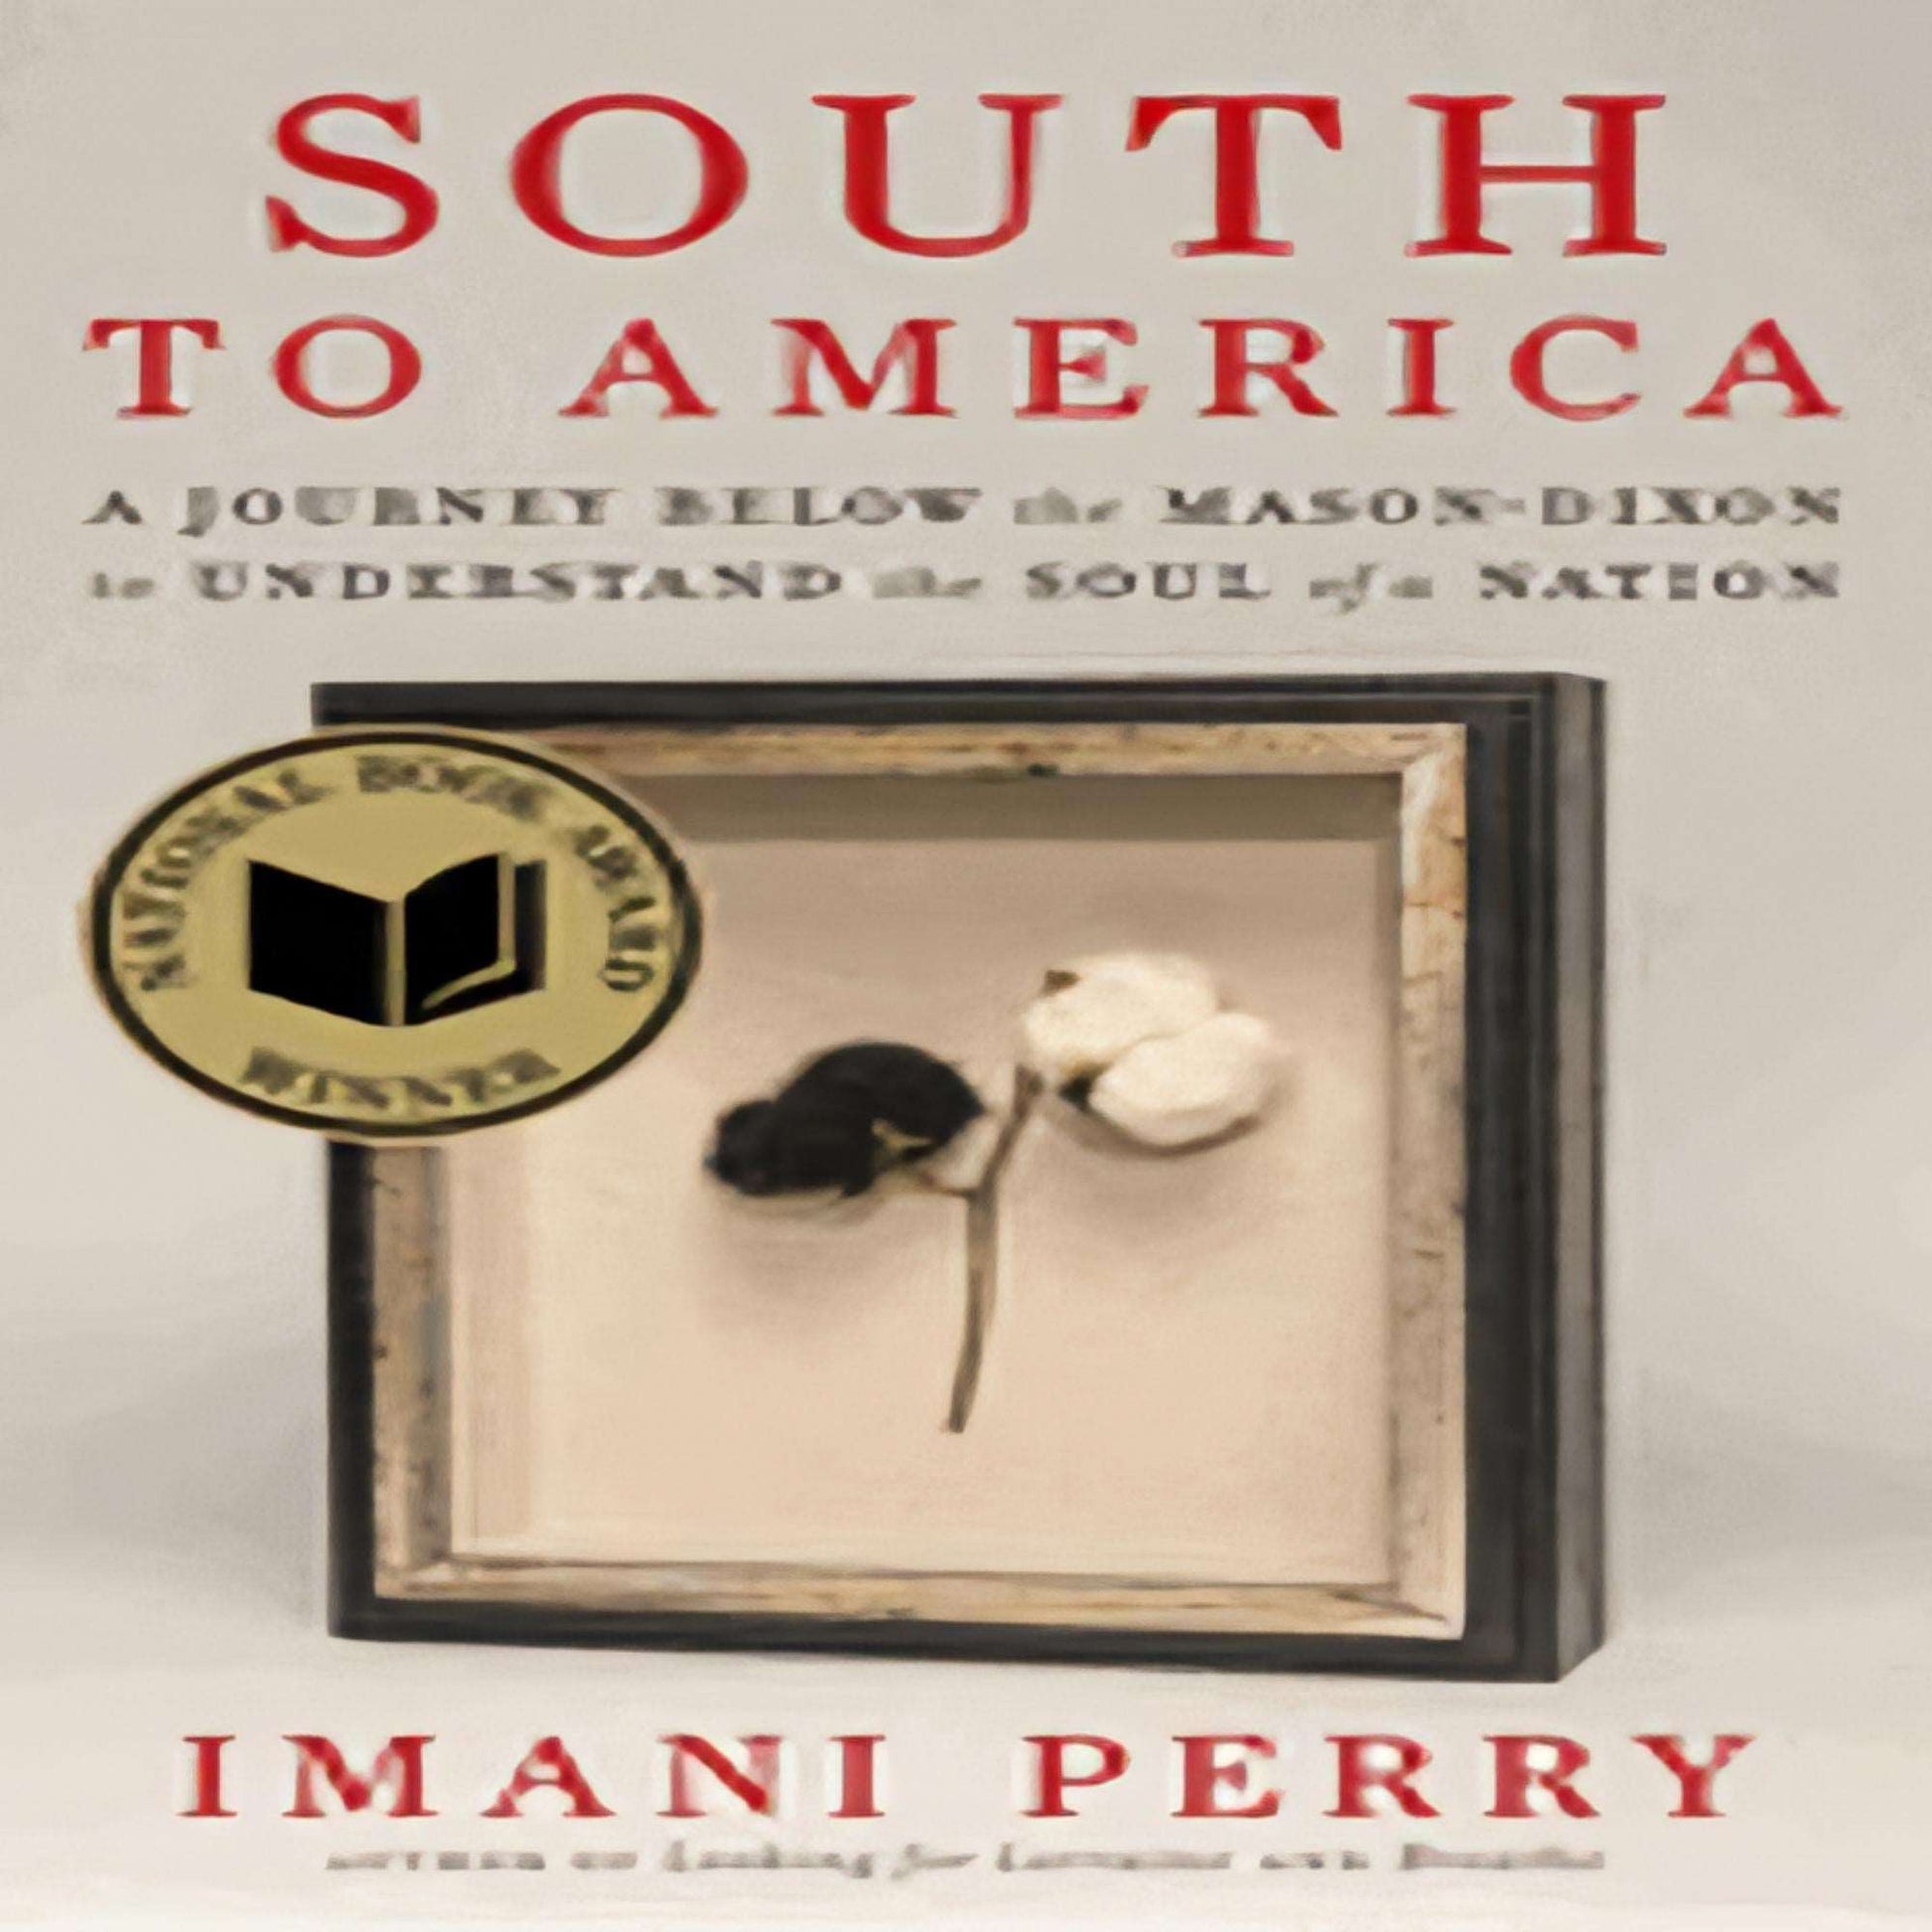 South to America: A Journey Below the Mason-Dixon to Understand the Soul of a Nation162-022723-0062977407DPGBOOKSTORE.COM. Today's Bestsellers.